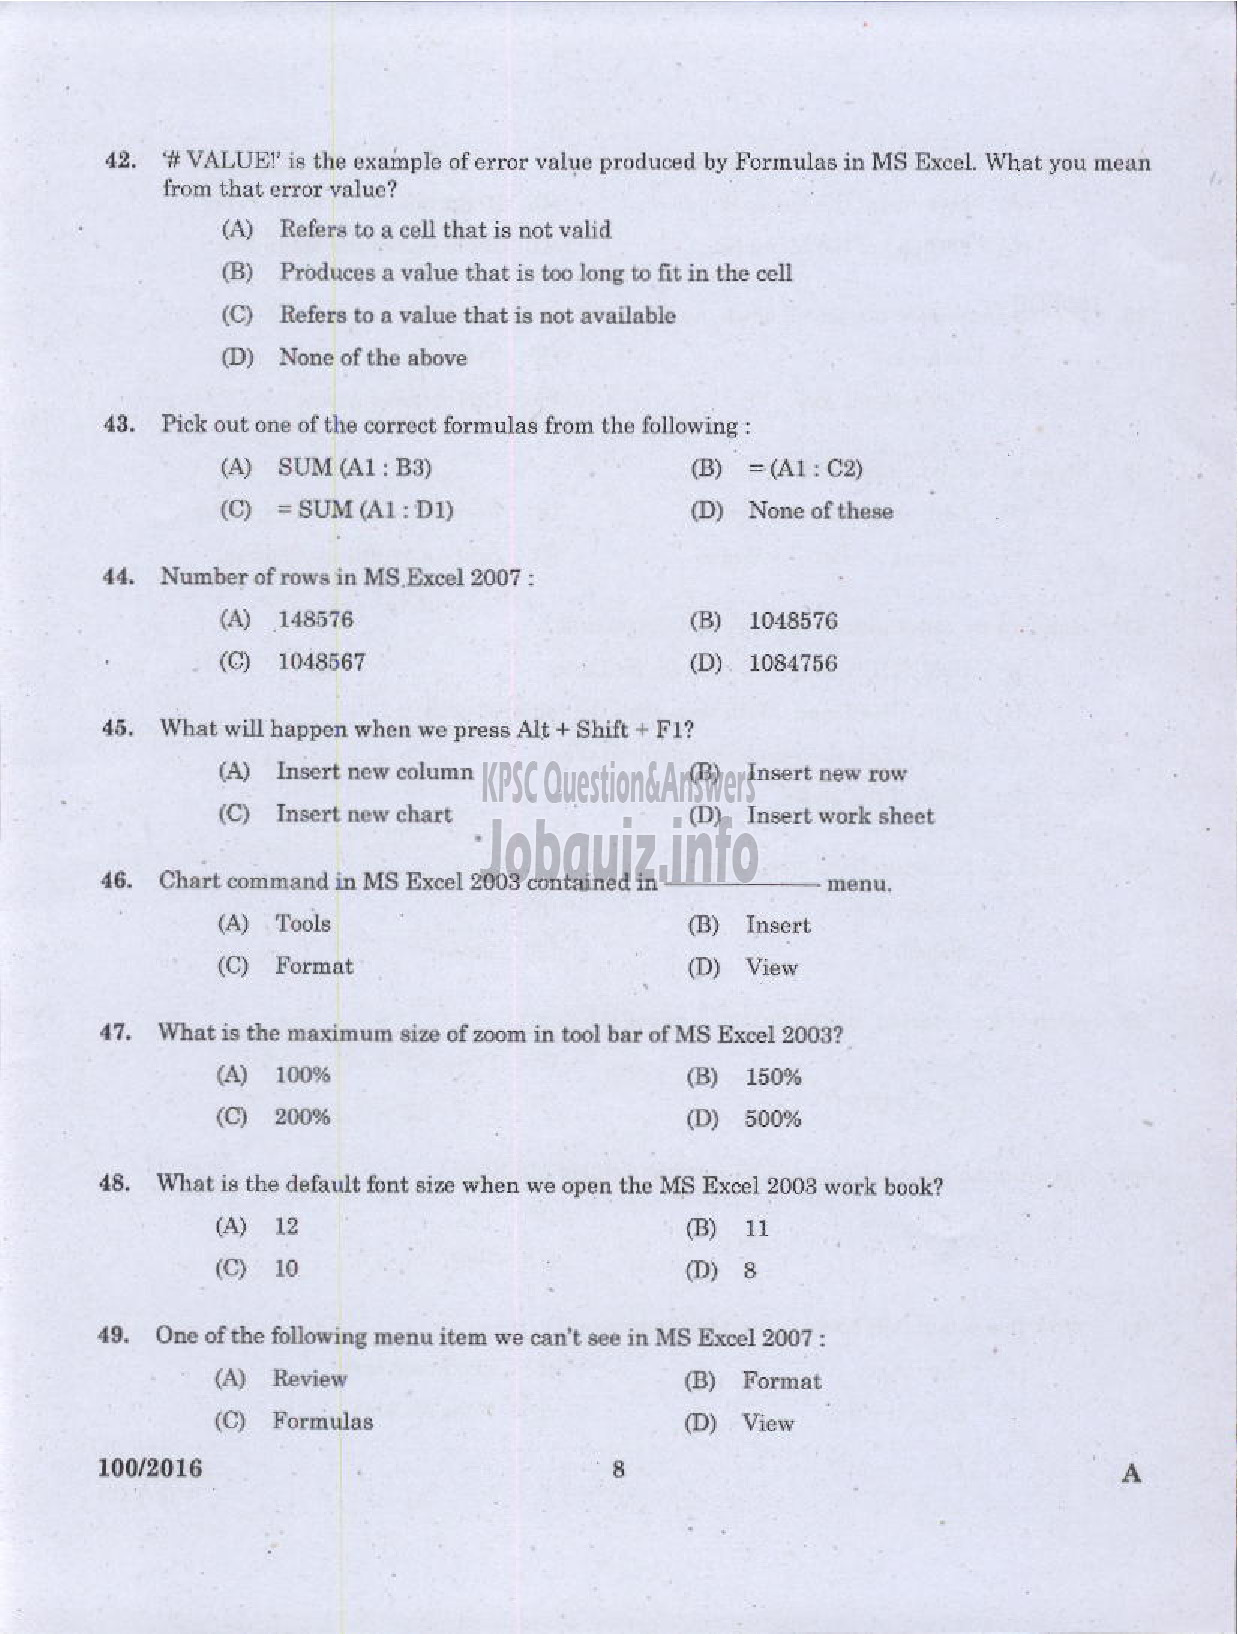 Kerala PSC Question Paper - DATA ENTRY OPERATOR DCB-6